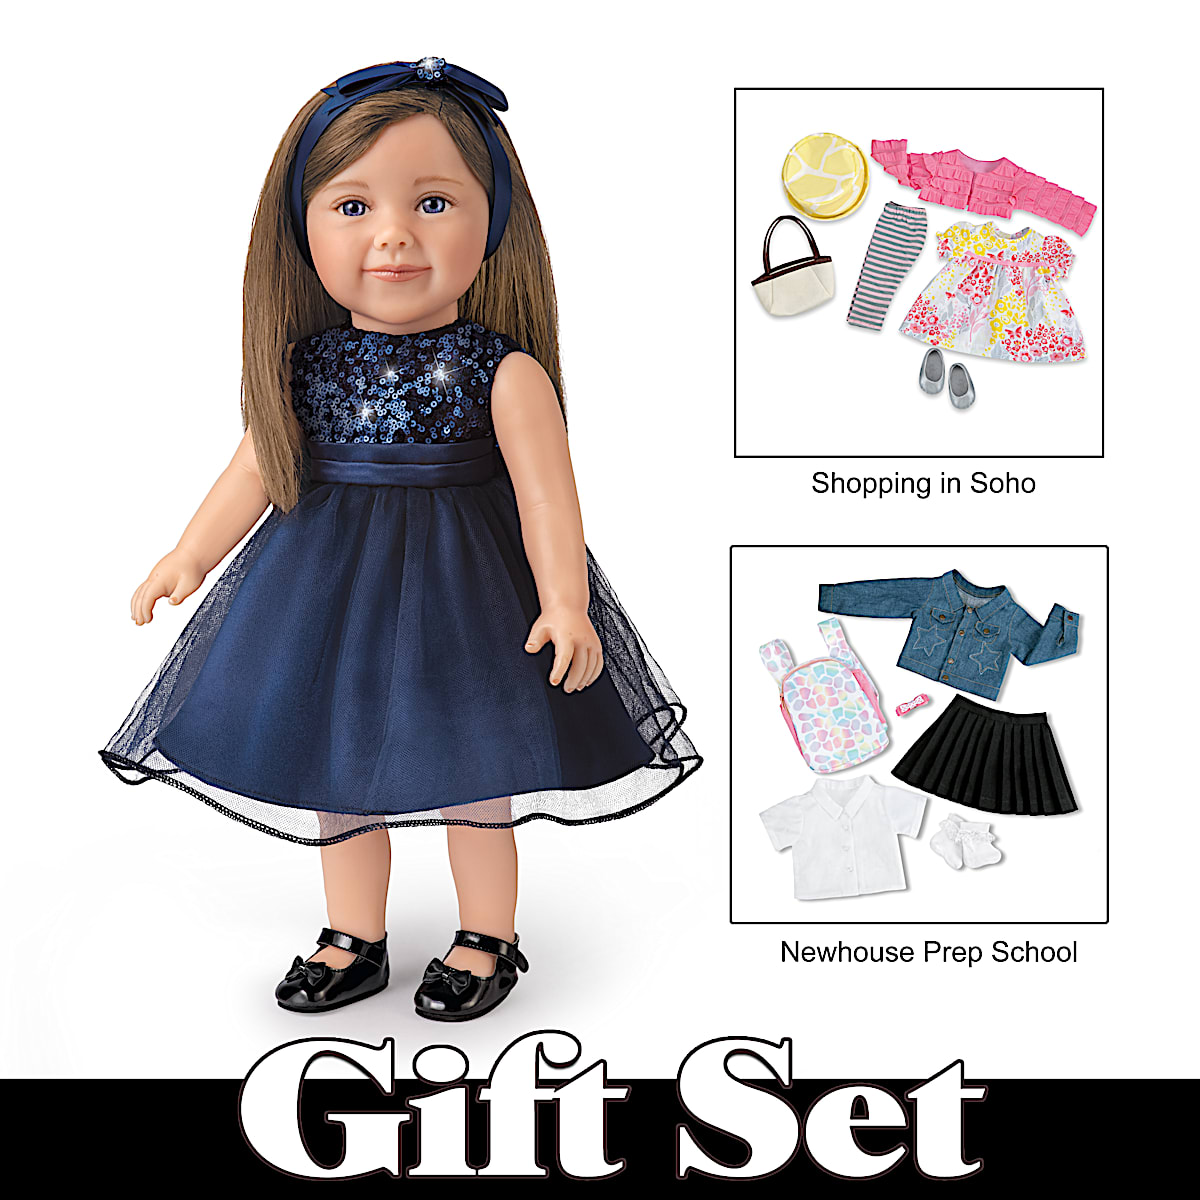 Our Generation Lucia 18 Fashion Doll with Faux-Fur Jacket & Floral Dress